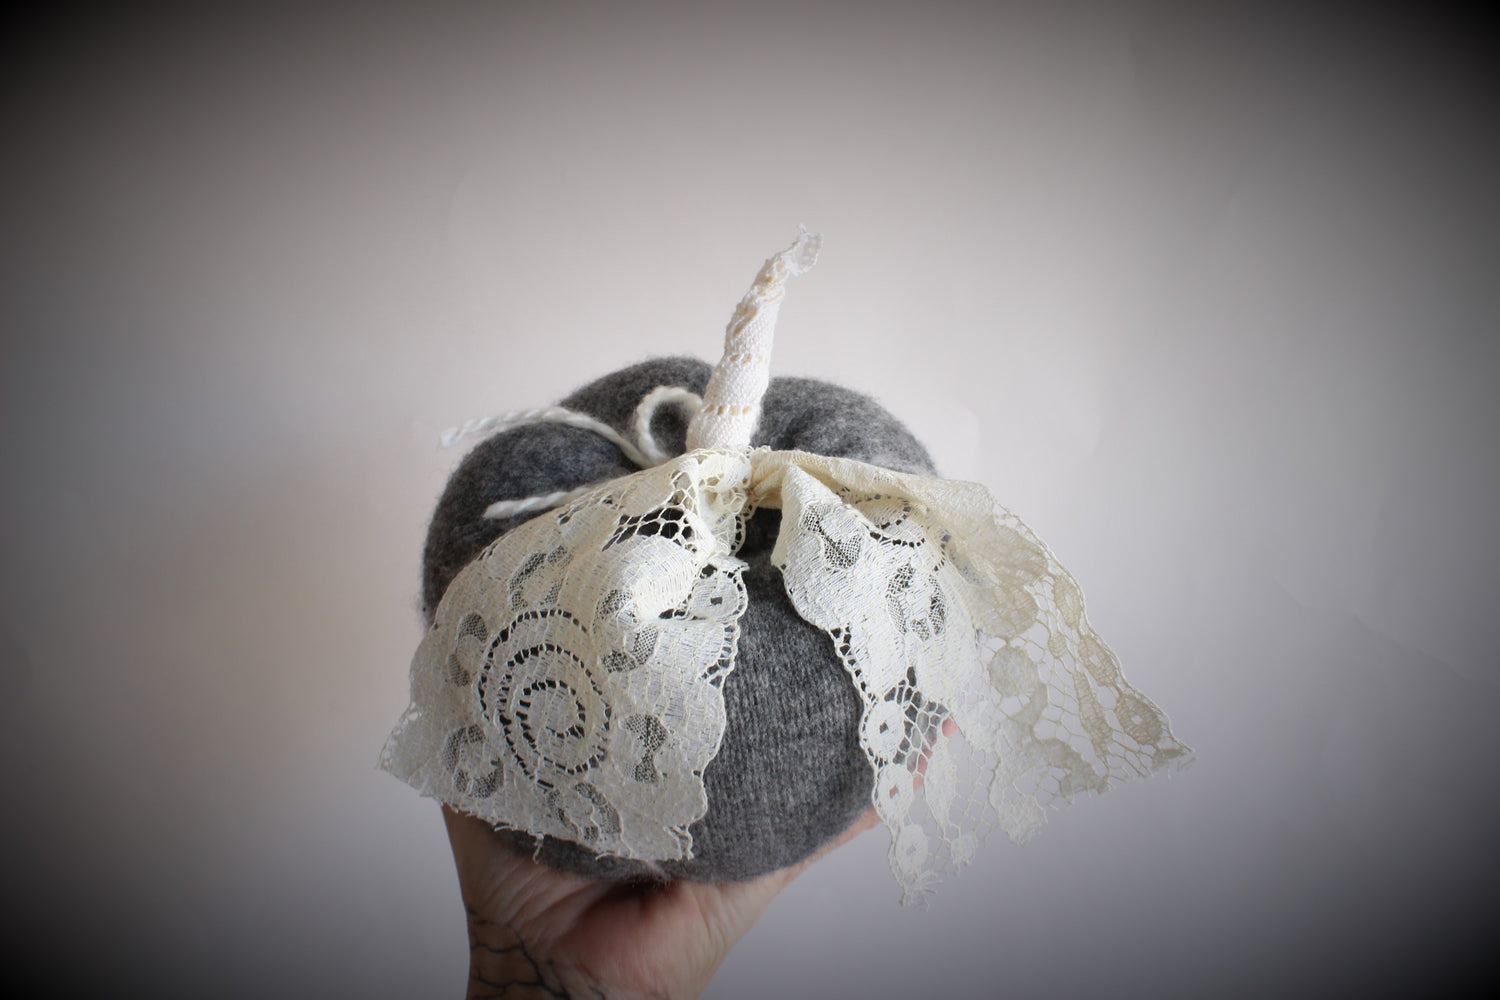 Knit Pumpkin PIllow Pouf in Gray Wool With Ivory Lace Leaves and Stem